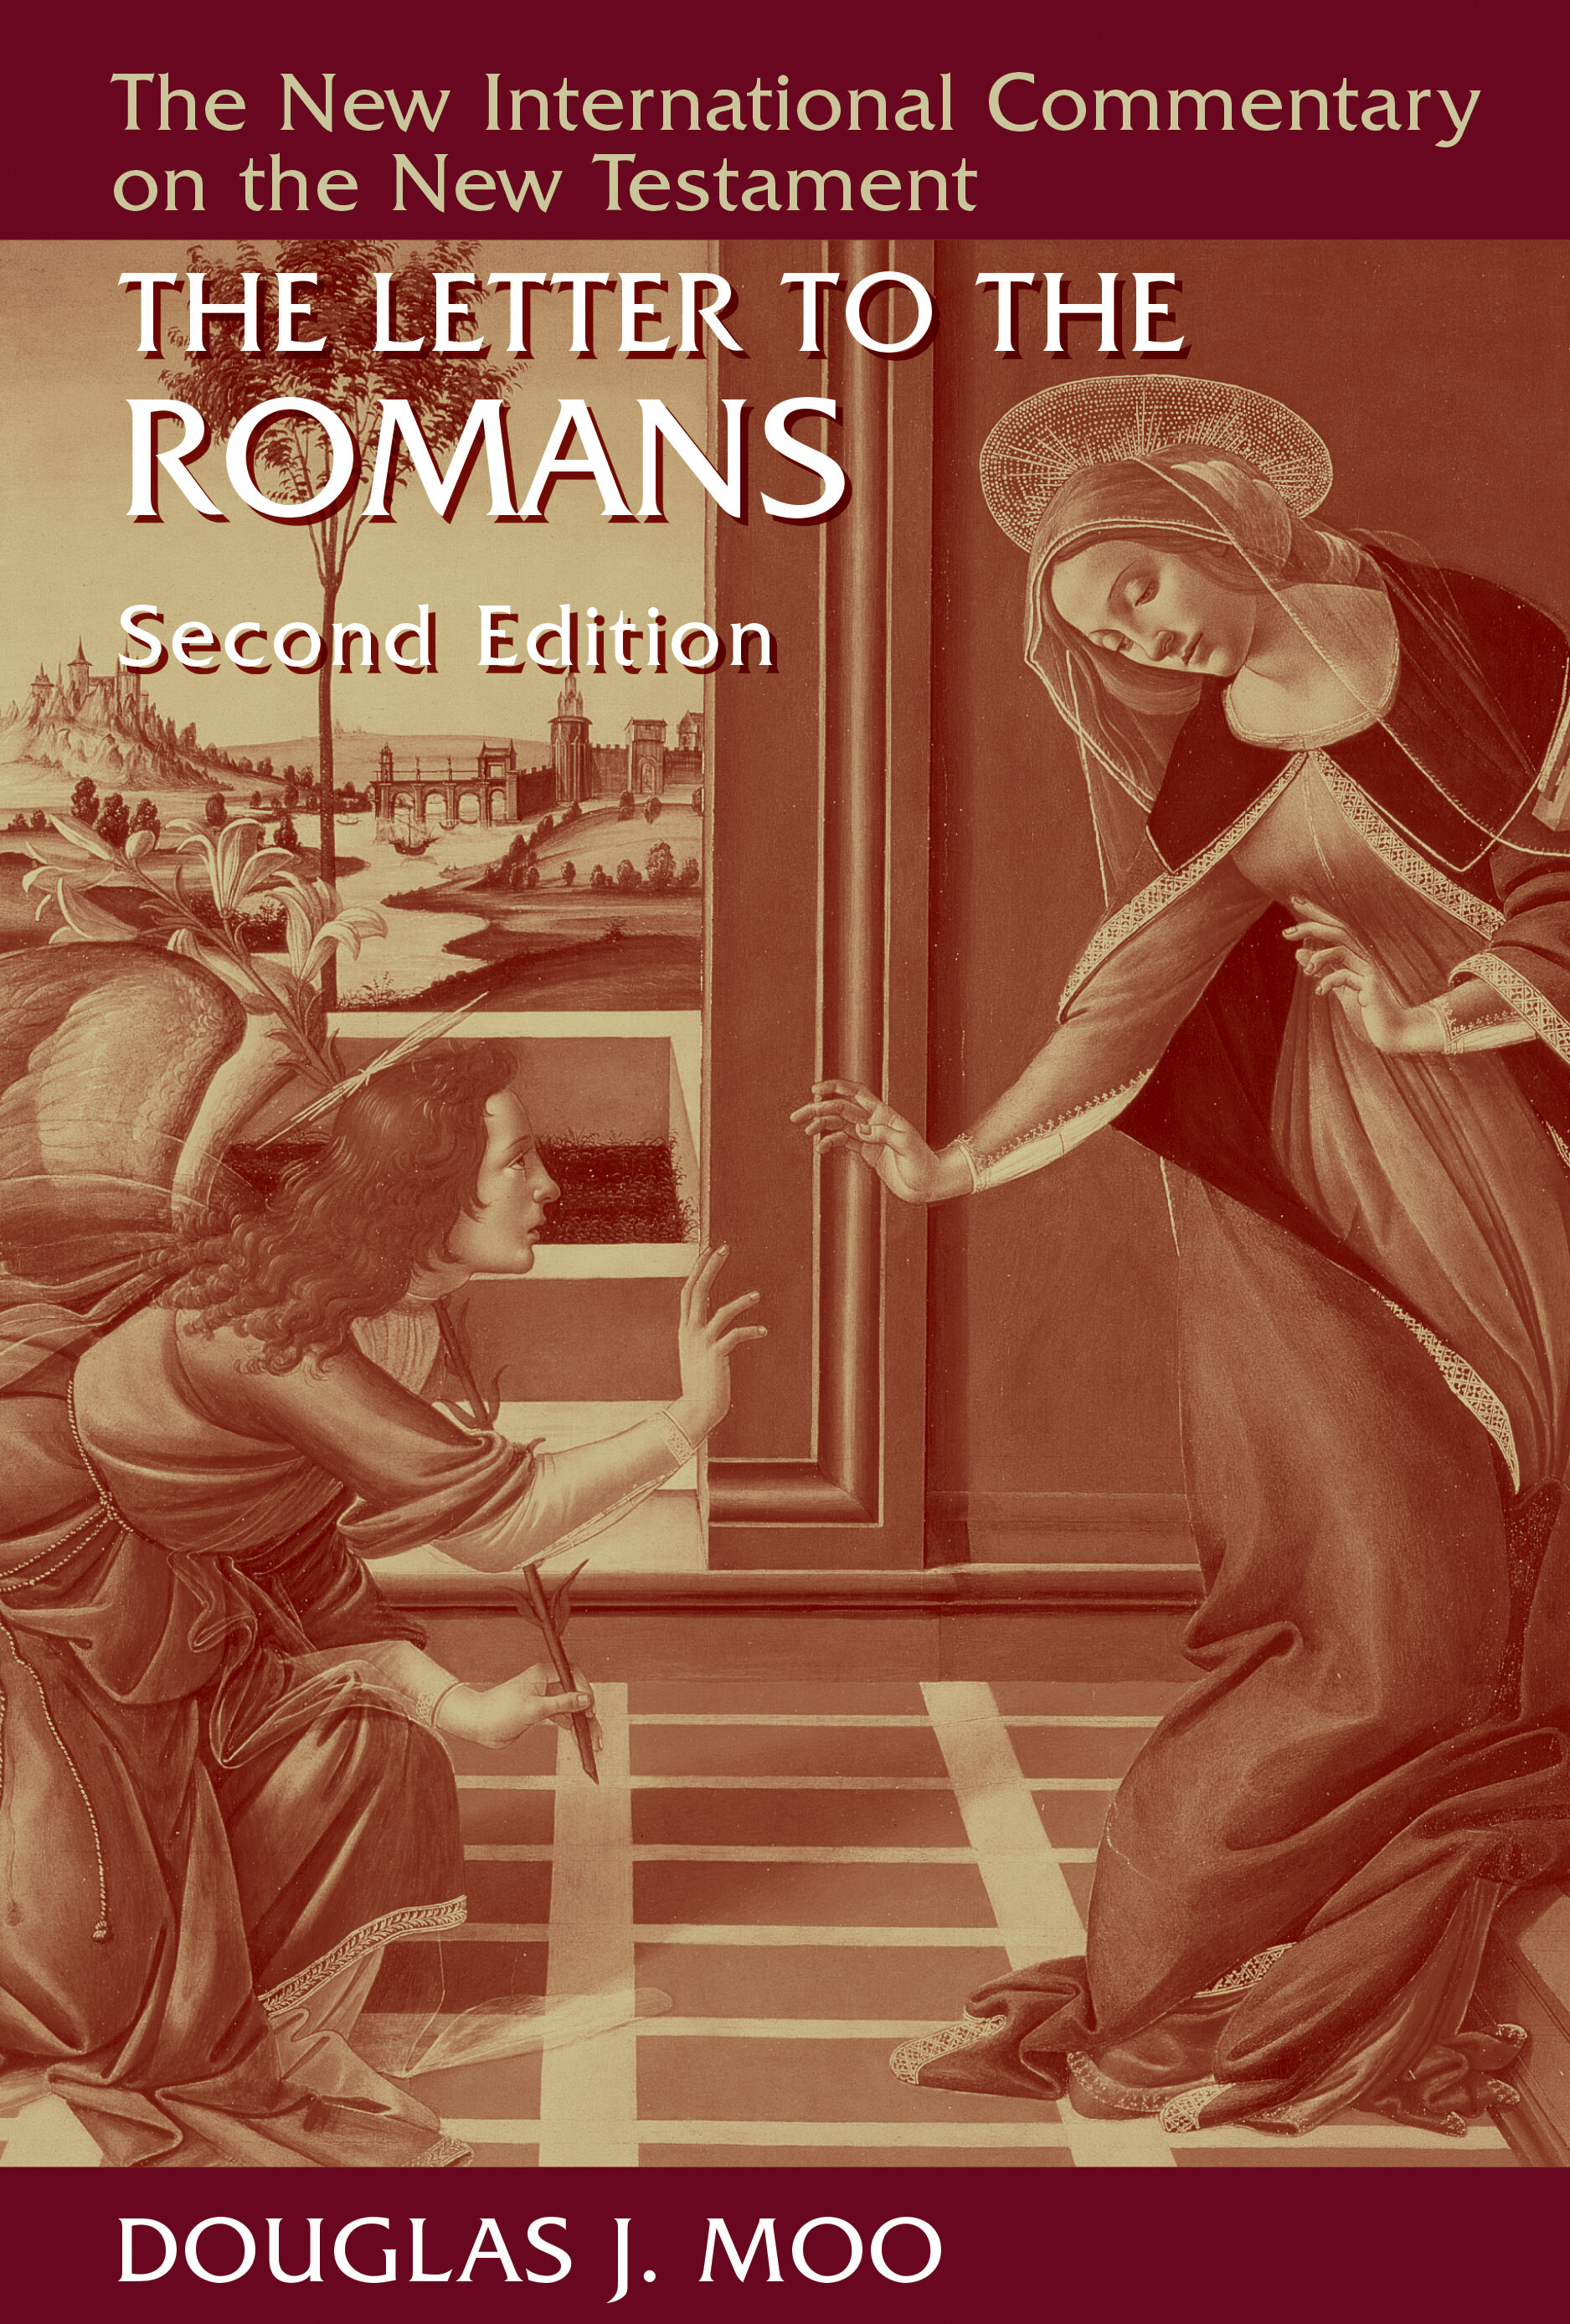 The Letter to the Romans, 2nd ed. (New International Commentary on the New Testament | NICNT)